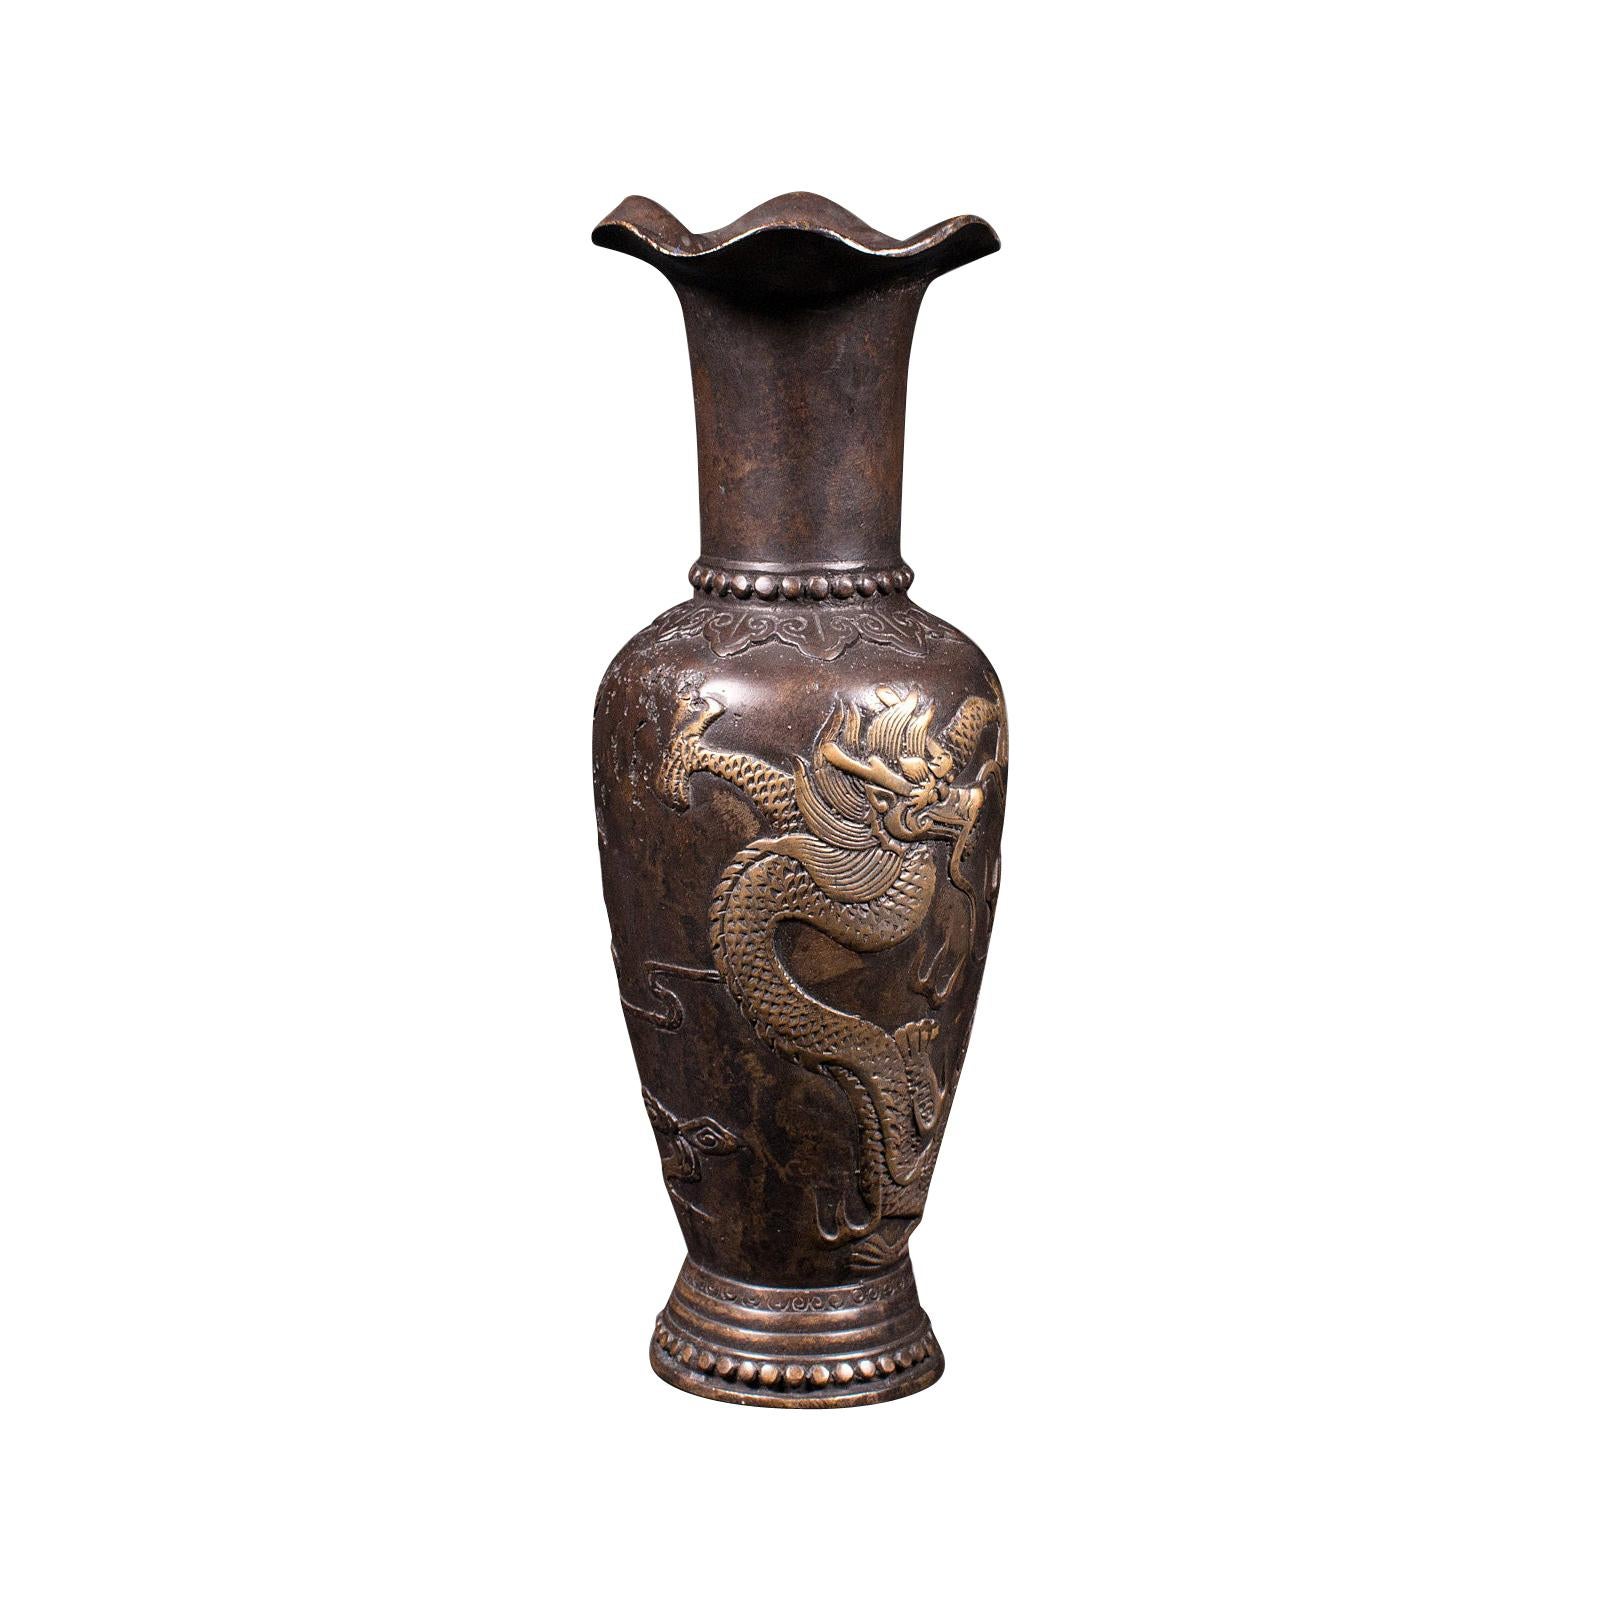 Small Antique Posy Vase, Chinese, Bronze, Decorative Flower Urn, Victorian, 1900 For Sale